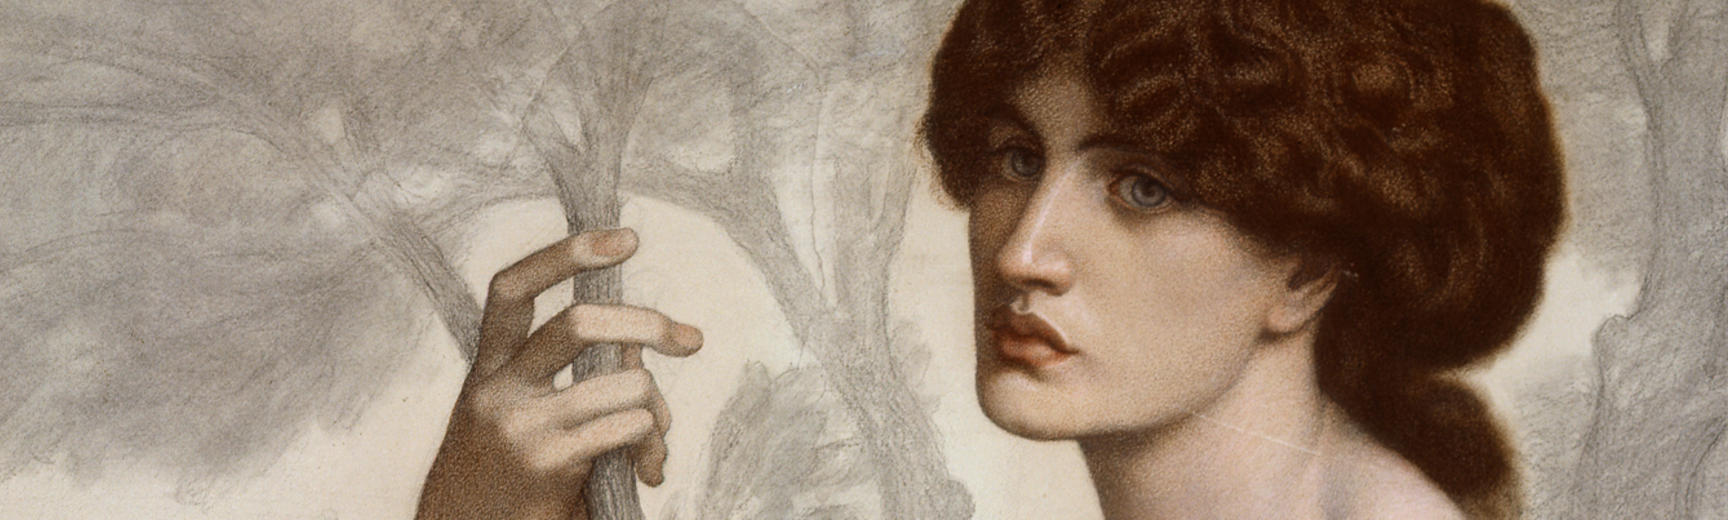 Detail from a painting by Rossetti of a woman holding a branch